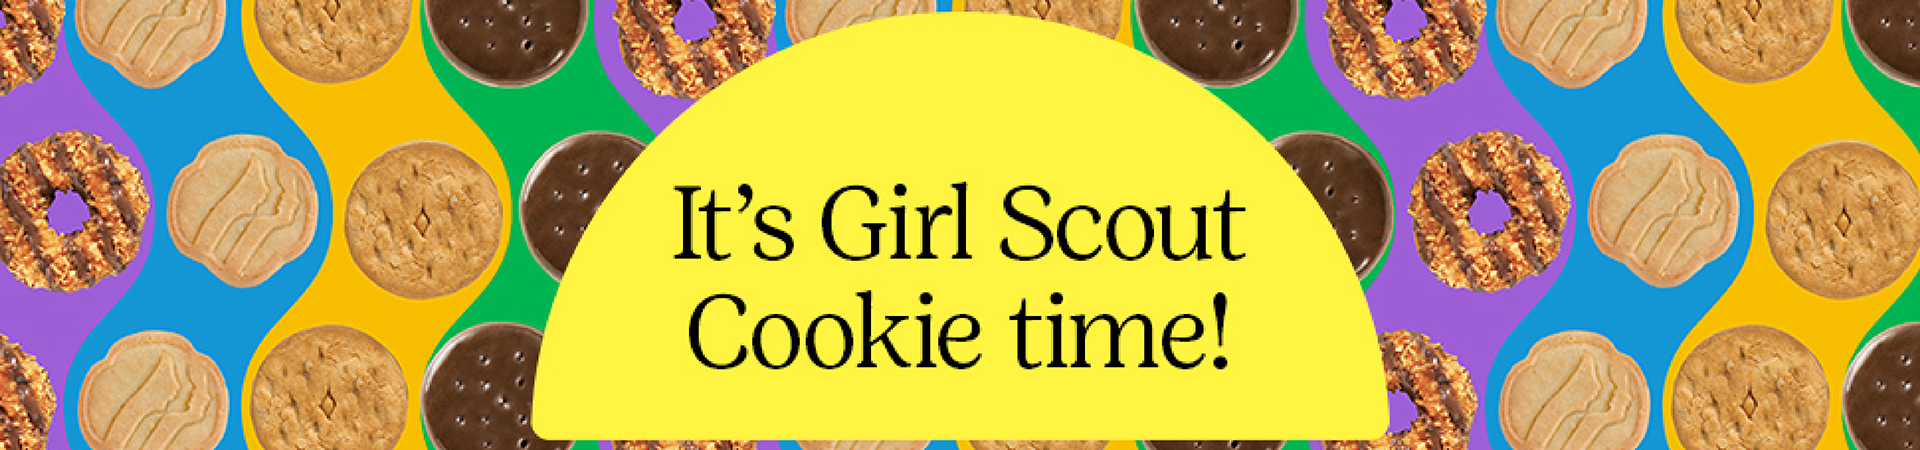  girl scout cookie time graphic 